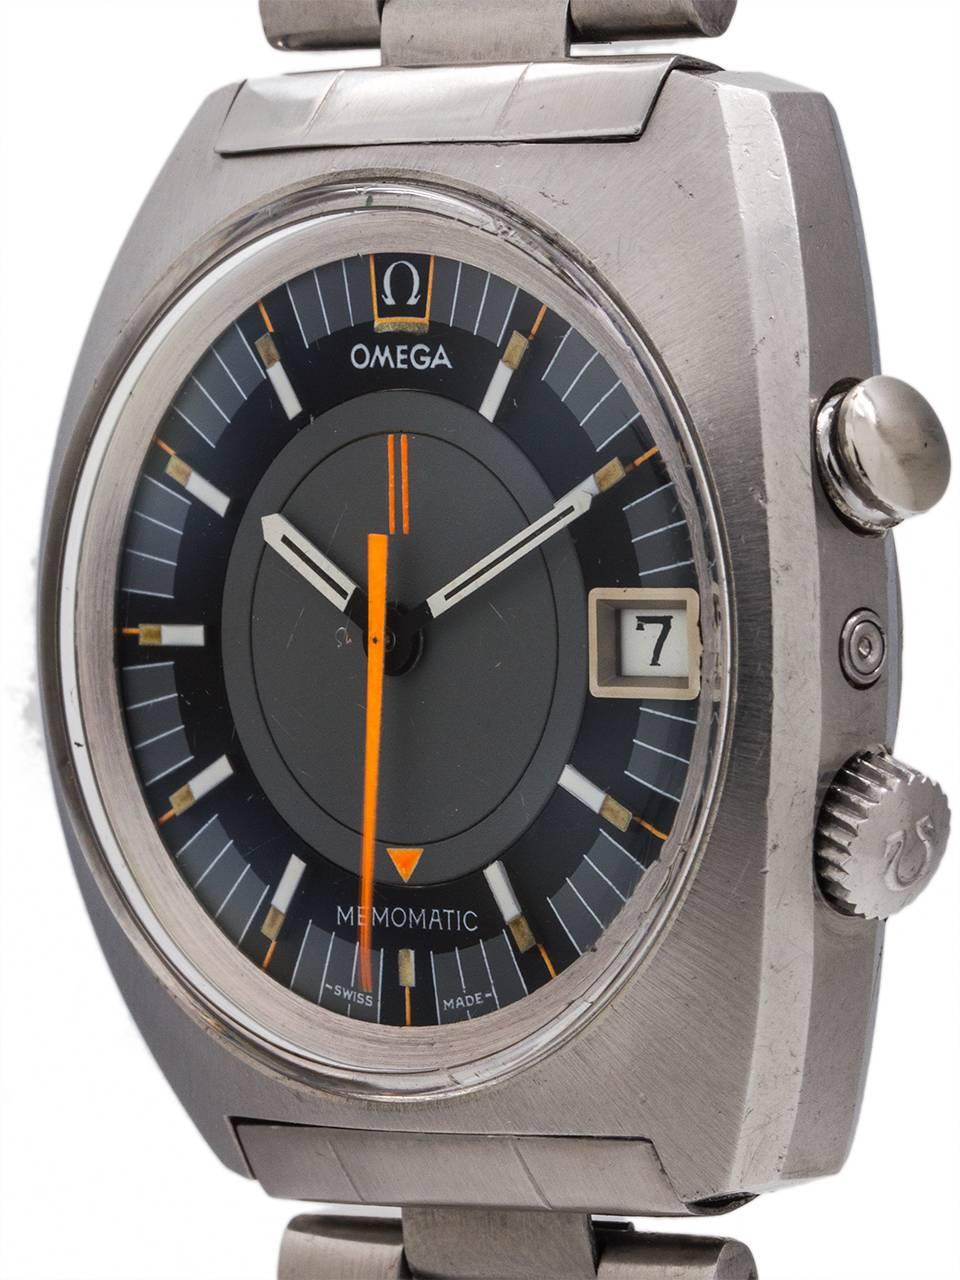 Omega stainless steel Seamaster Memomatic ref 166.072 serial # 30.0 million circa 1969. 40 x 43mm over sized cushion shaped case with acrylic crystal. Original gray and black dial, orange alarm indicator arrow with original signed bracelet. Powered